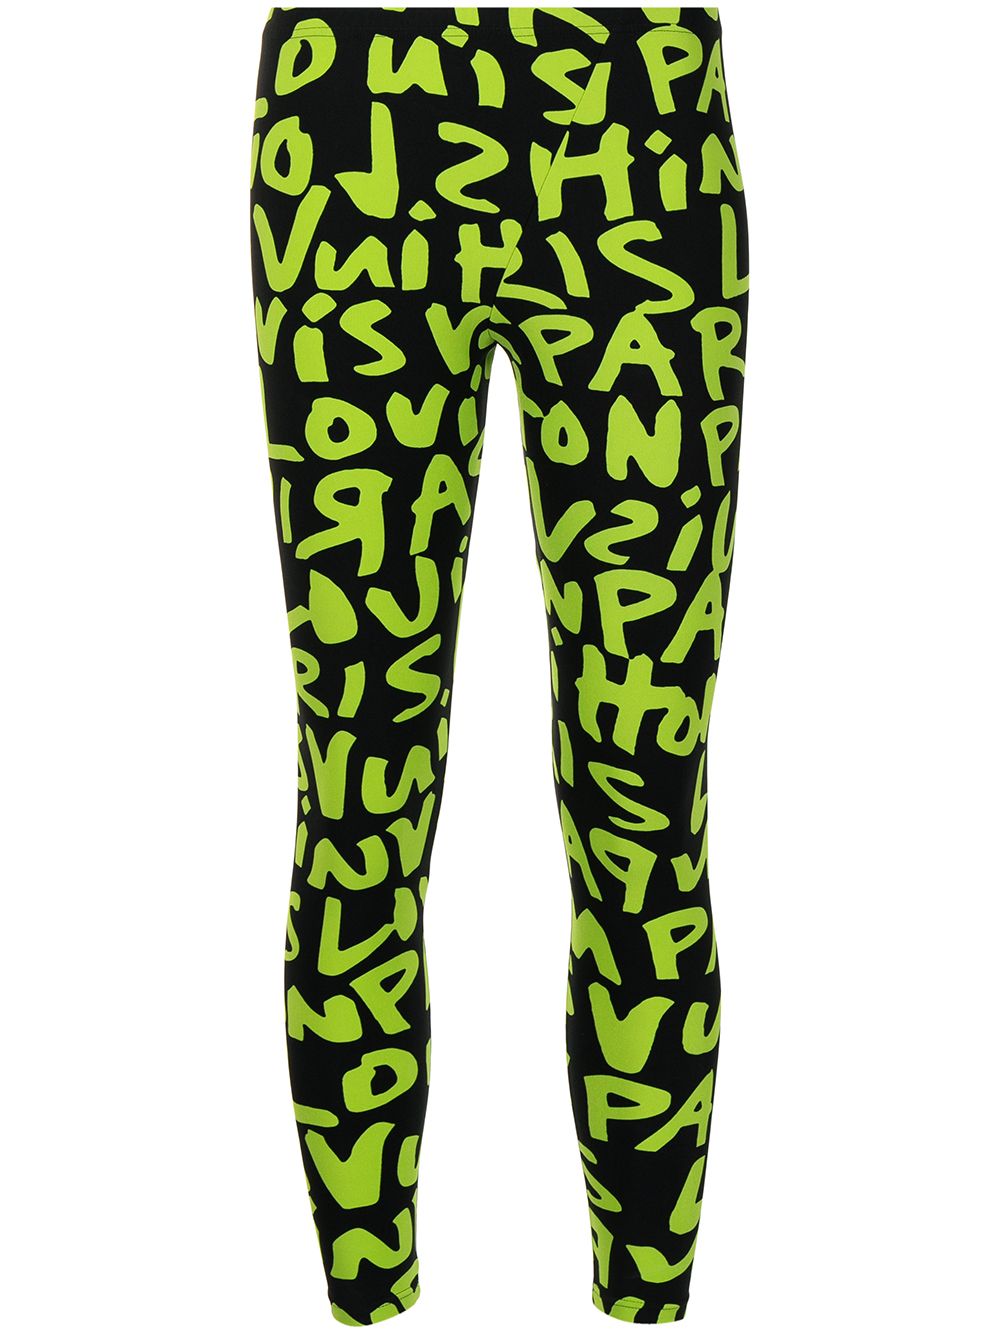 Louis Vuitton Pre-Owned x Stephen Sprouse 2001 Graffiti Leggings - Schwarz von Louis Vuitton Pre-Owned